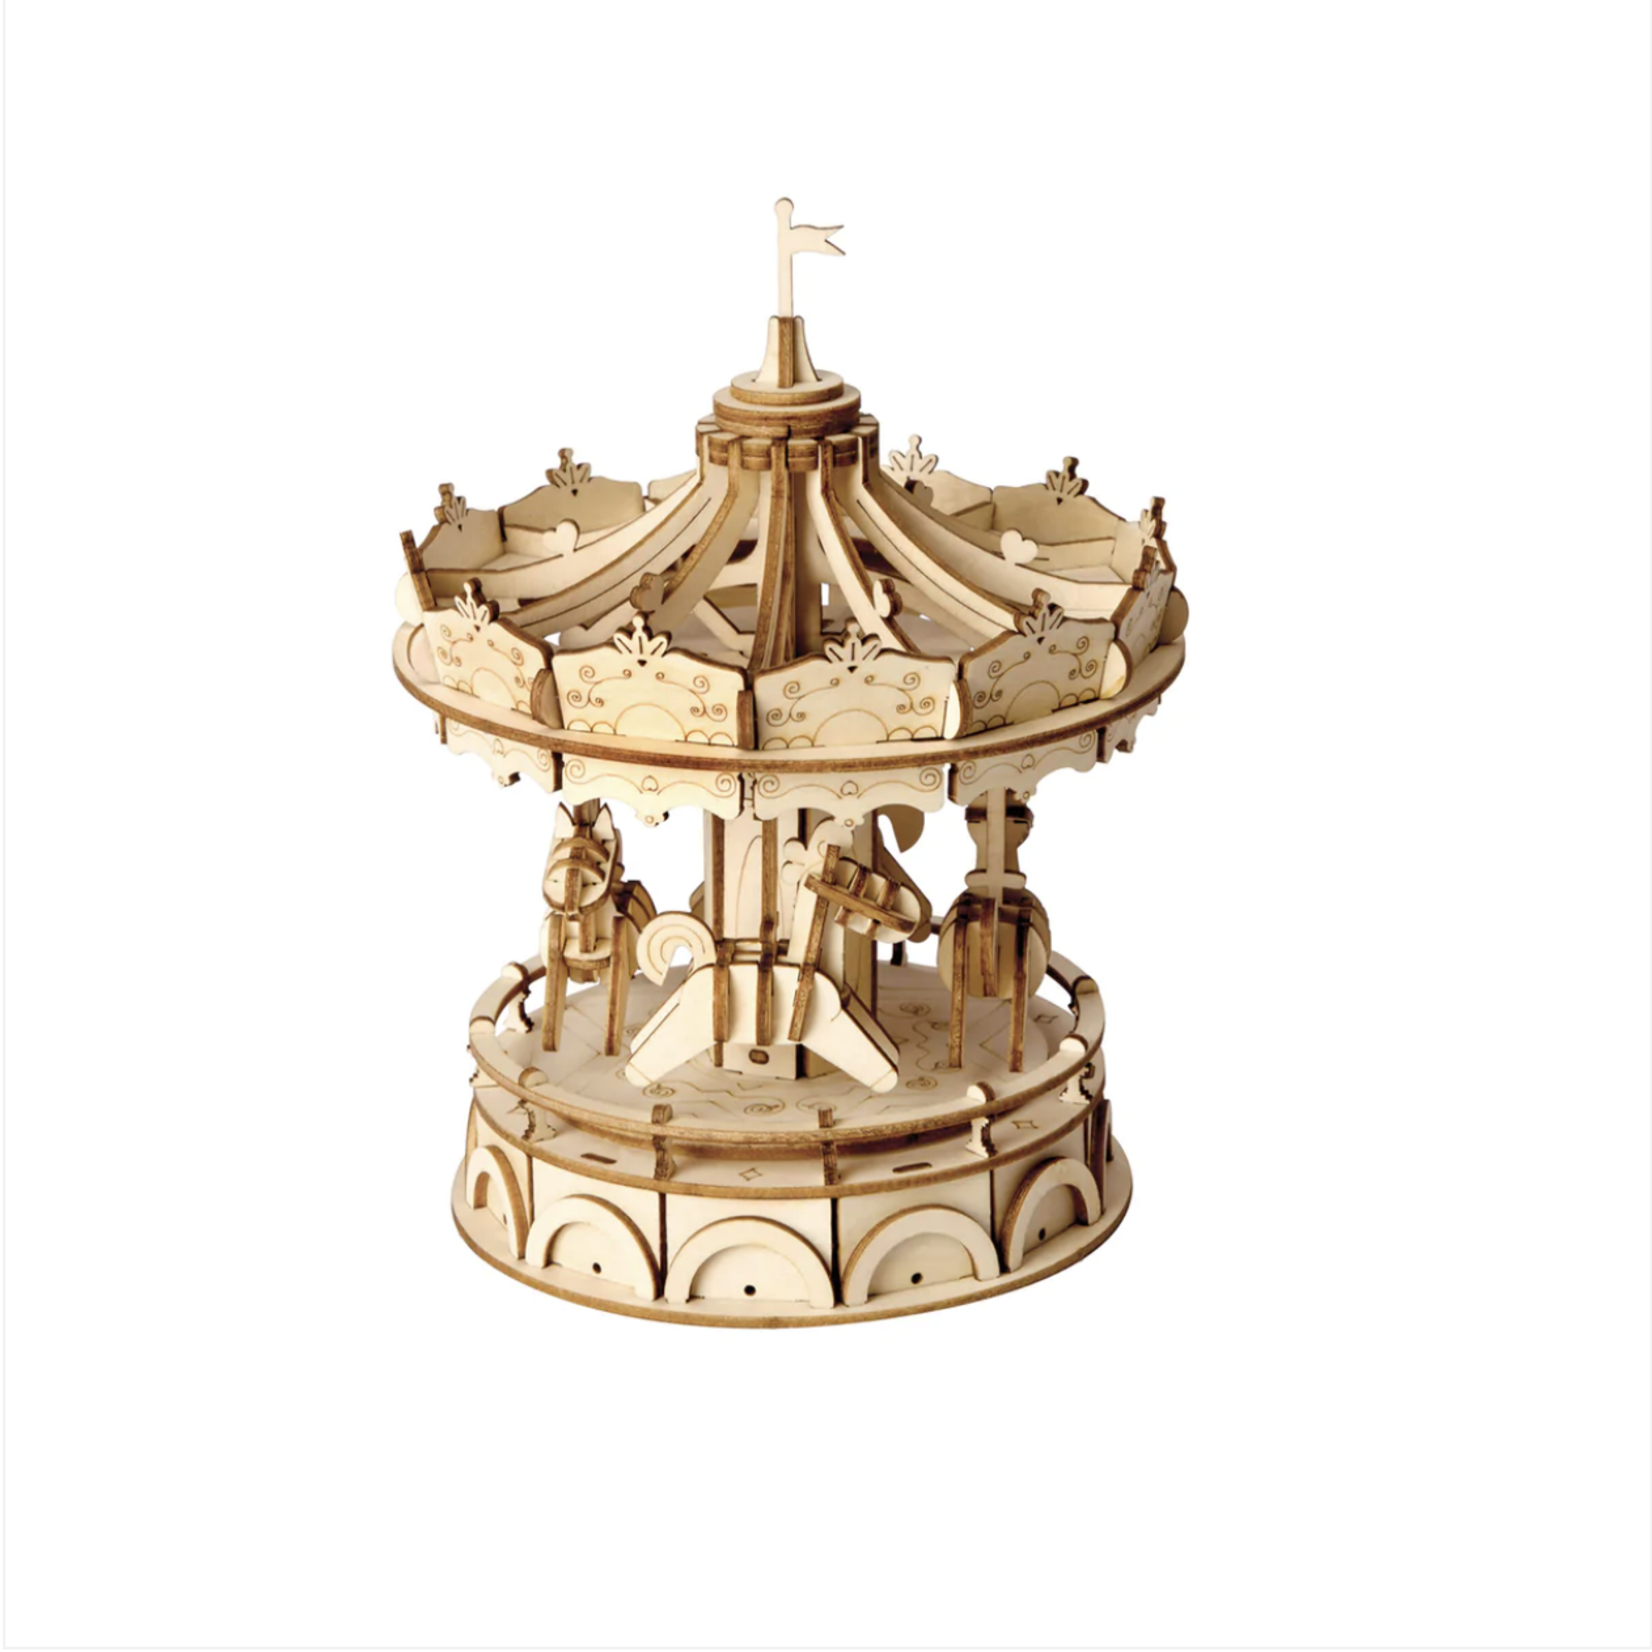 HANDS CRAFT CLASSICAL 3D WOODEN PUZZLE MERRY GO ROUND